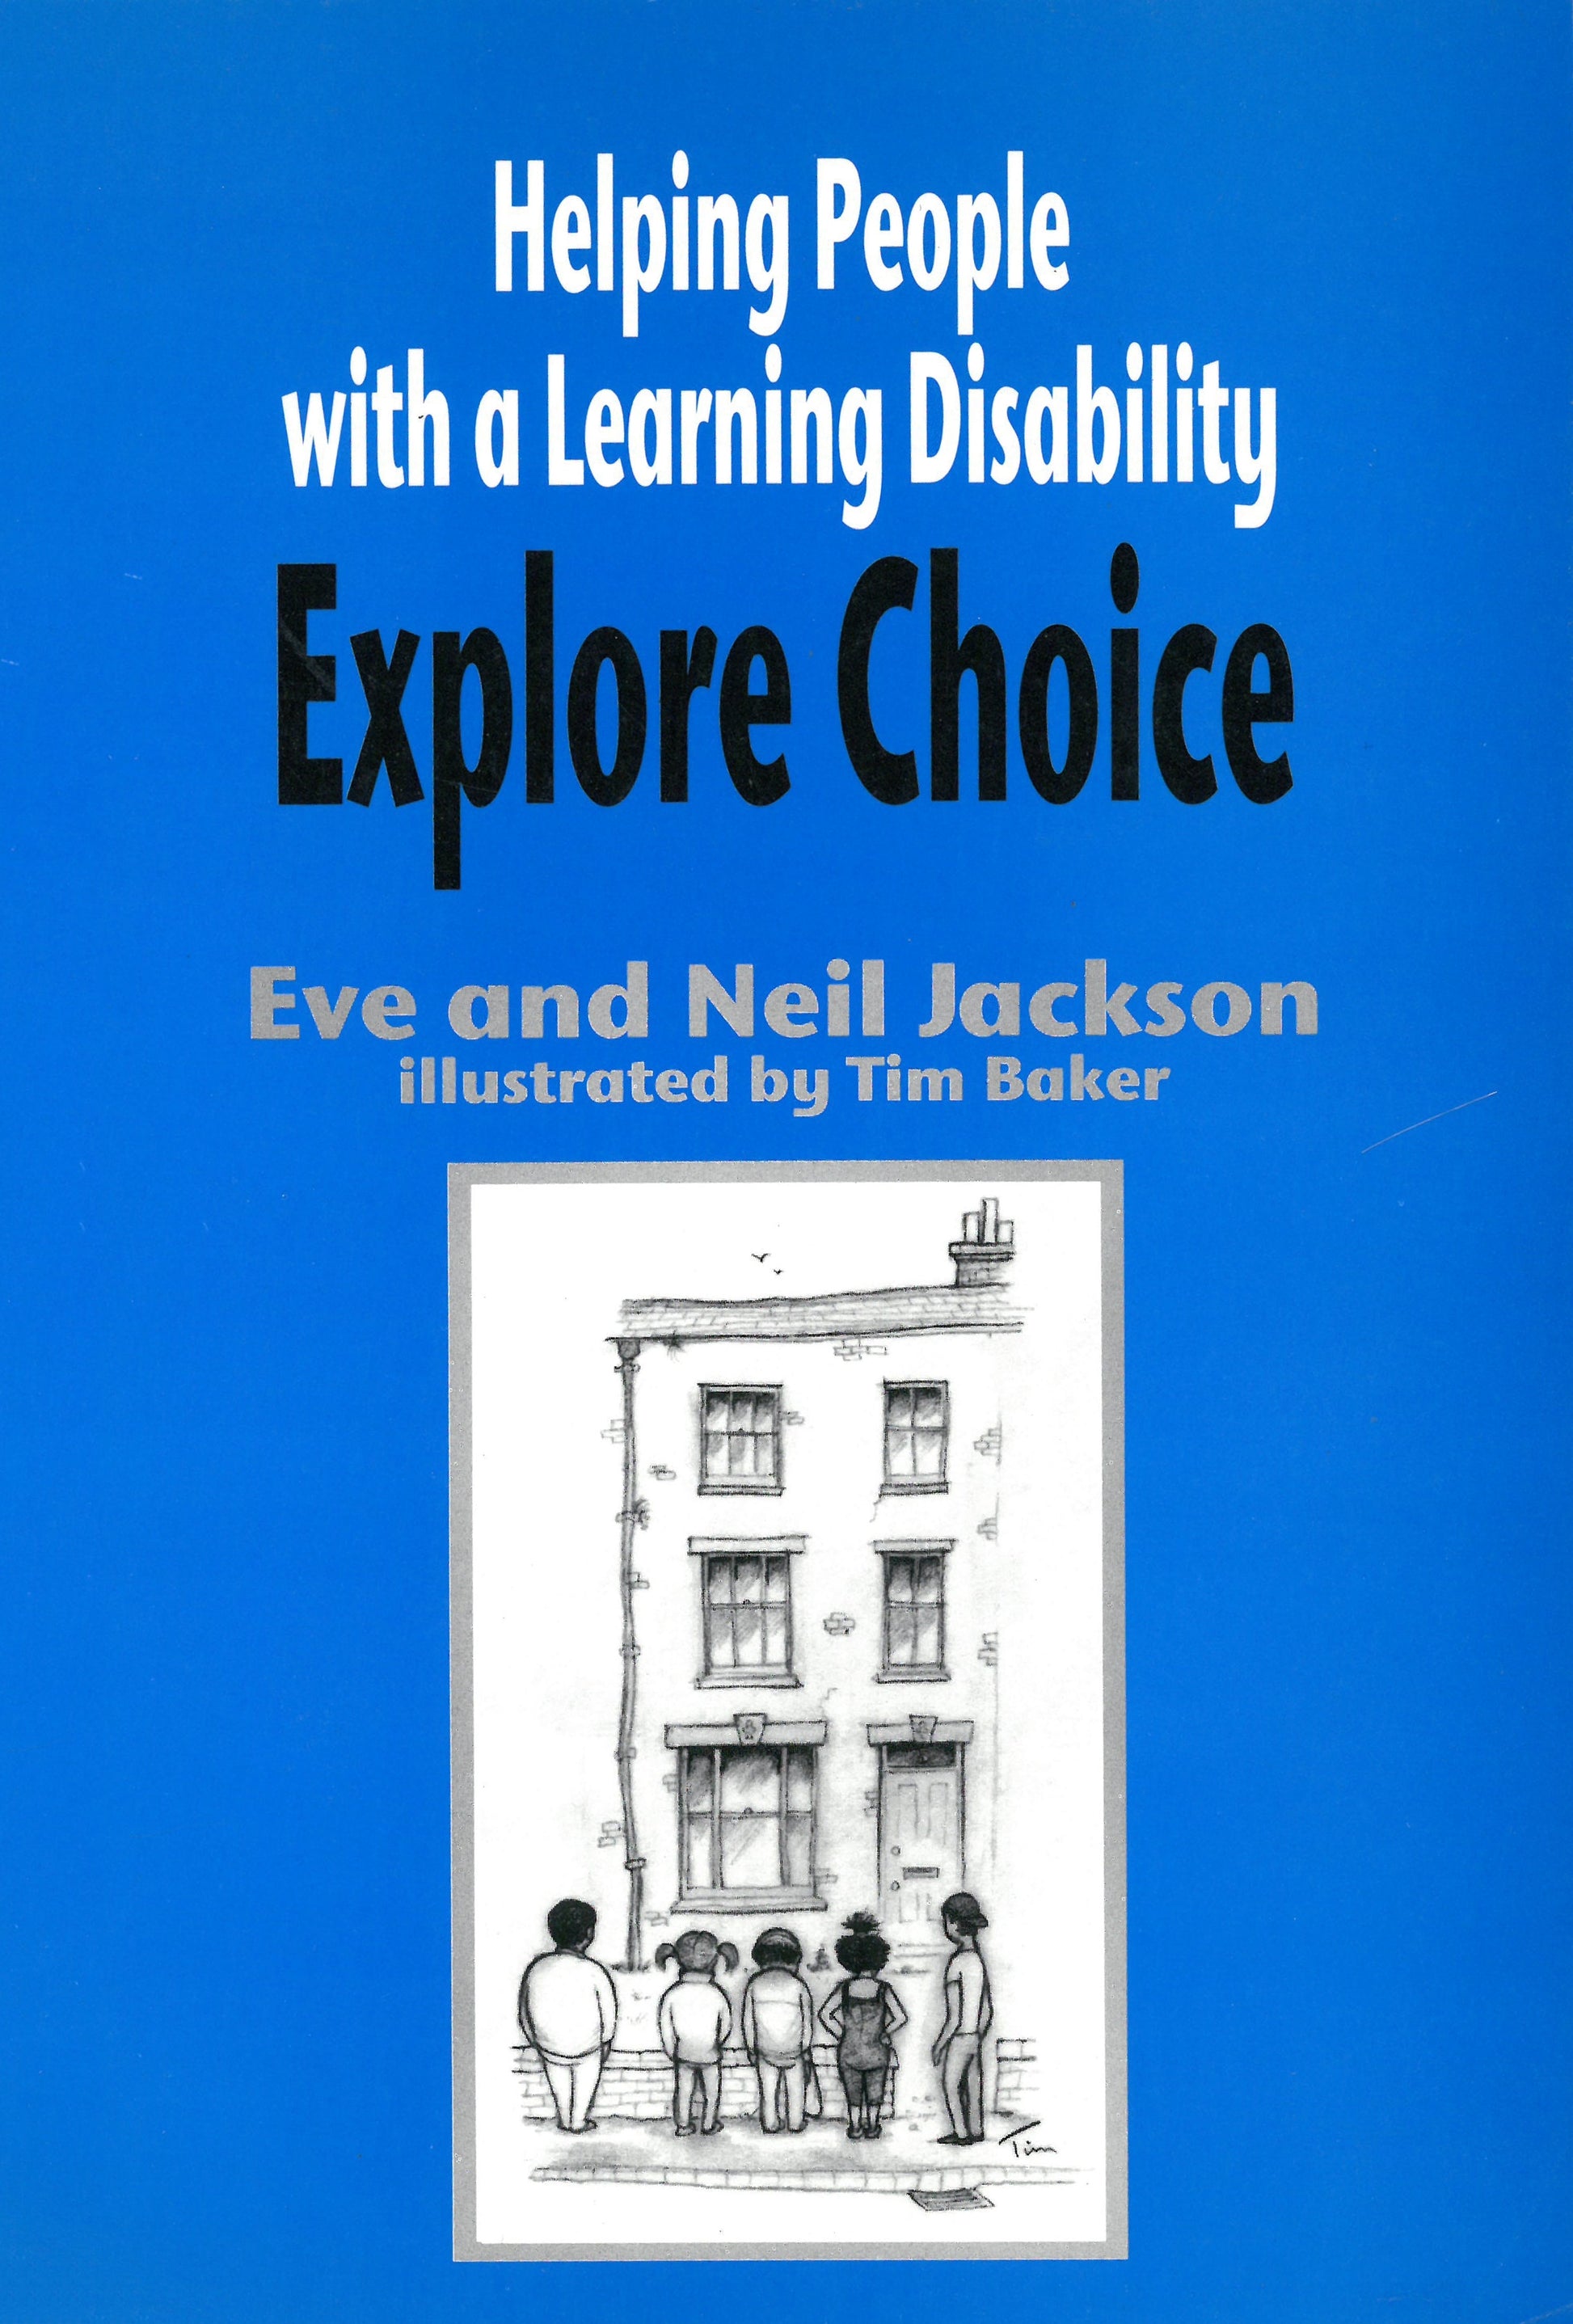 Helping People with a Learning Disability Explore Choice by Eve and Neil Jackson